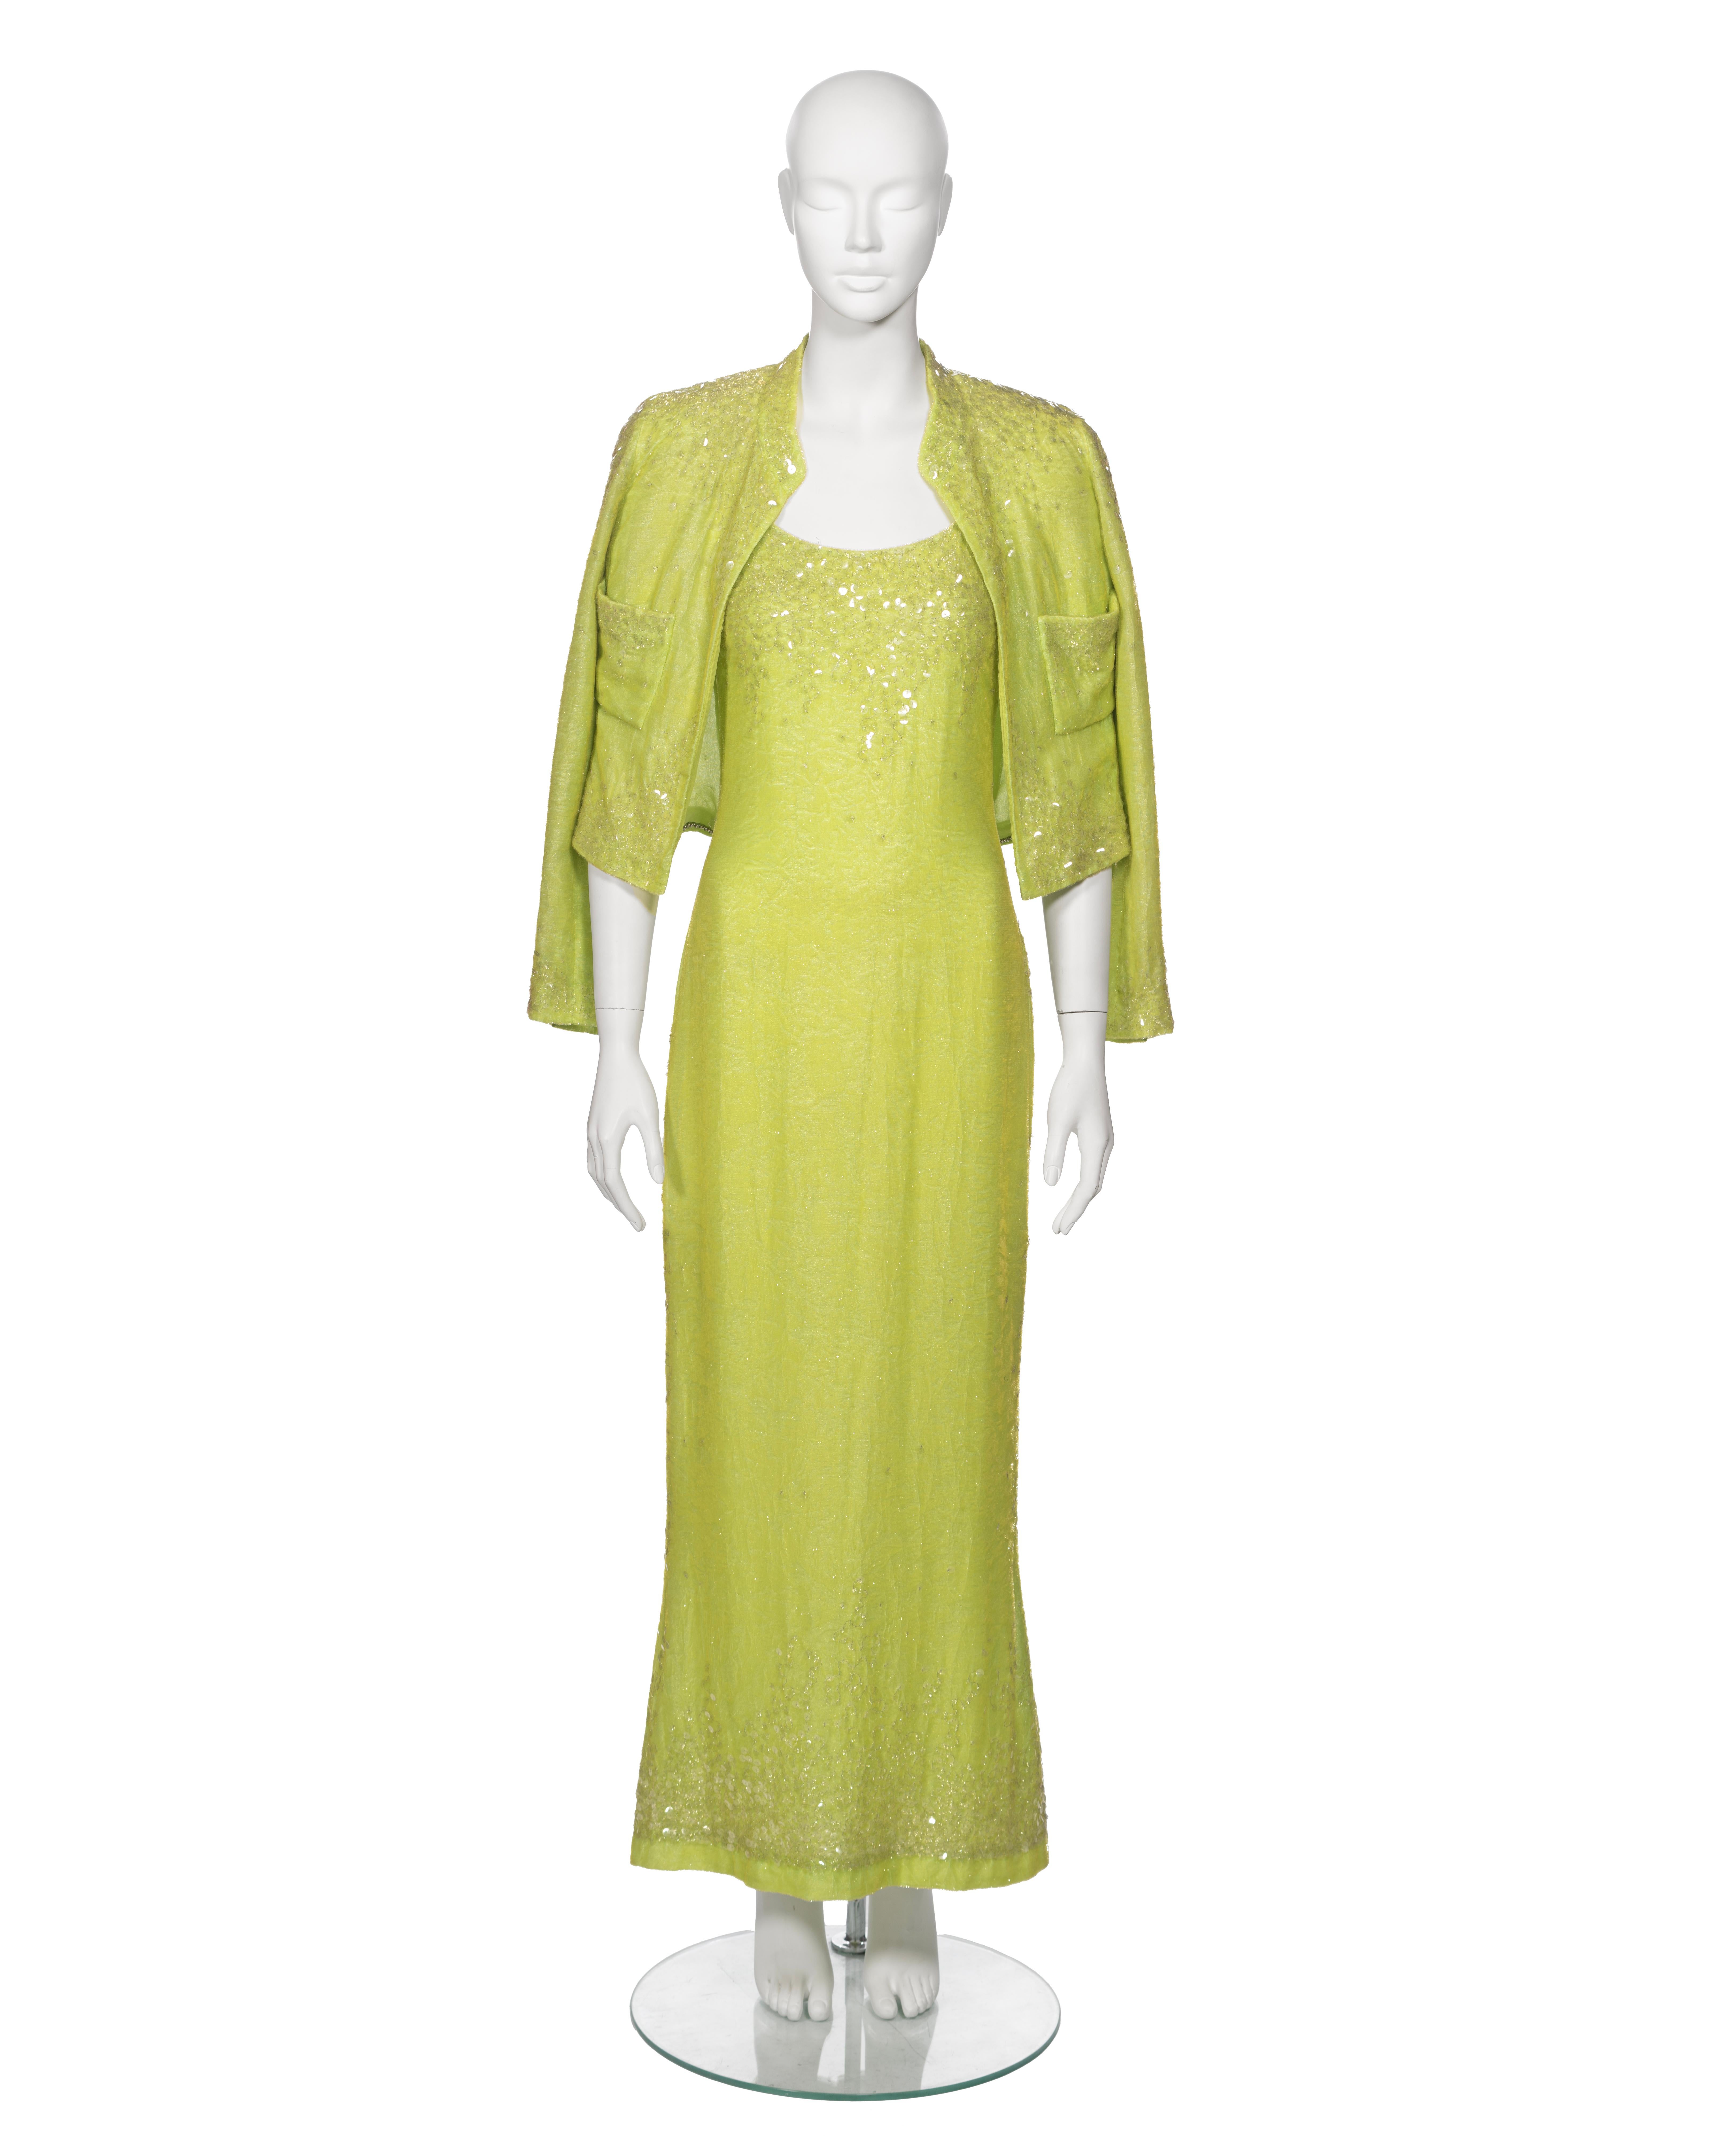 ▪  Archival Chanel Evening Ensemble 
▪ Creative Director: Karl Lagerfeld
▪ Spring-Summer 1997
▪ Exquisitely crafted from plush lime green velvet, adorned with clear sequins 
▪ Maxi dress features a flattering scoop neckline, delicate spaghetti